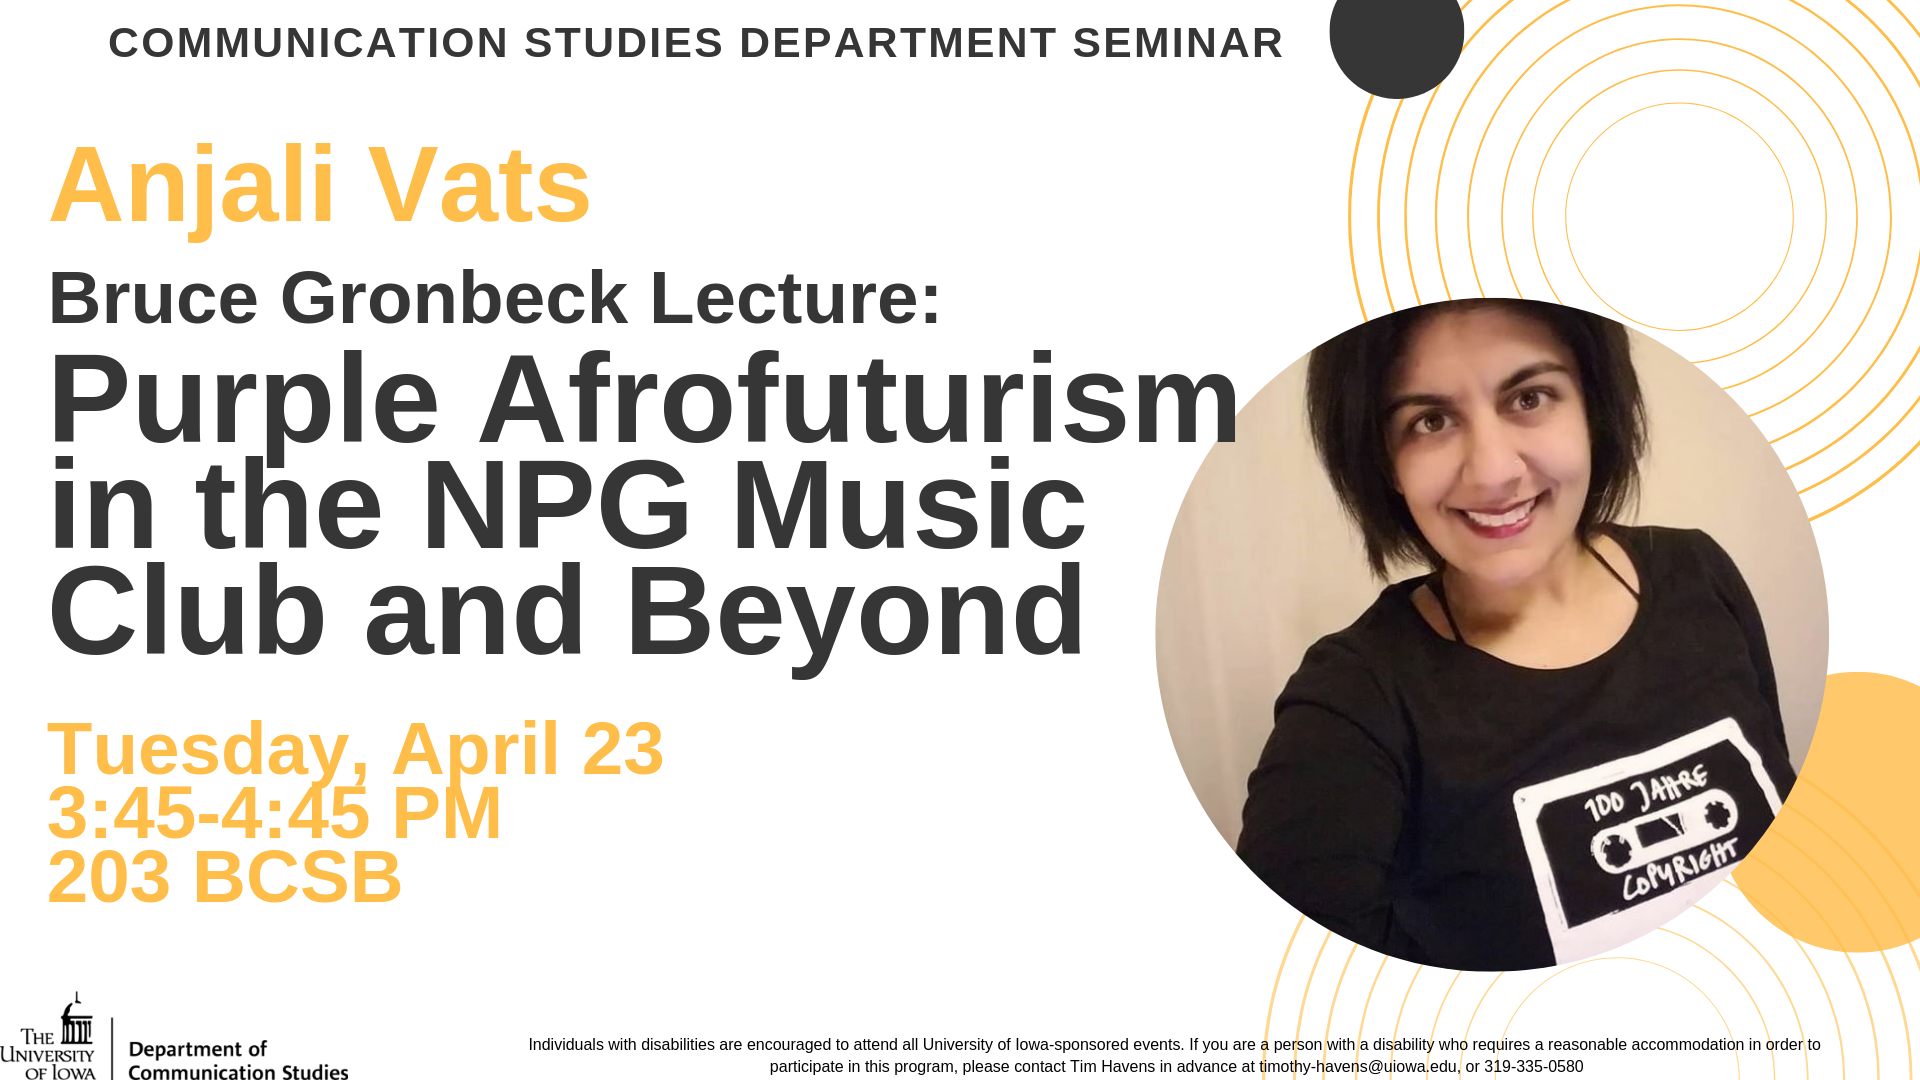 Anjali Vats, Bruce Gronbeck Lecture: Purple Afrofuturism in the NPG Music Club and Beyond. Tuesday, March 5th, 3:45-4:45 PM, 203 BCSB